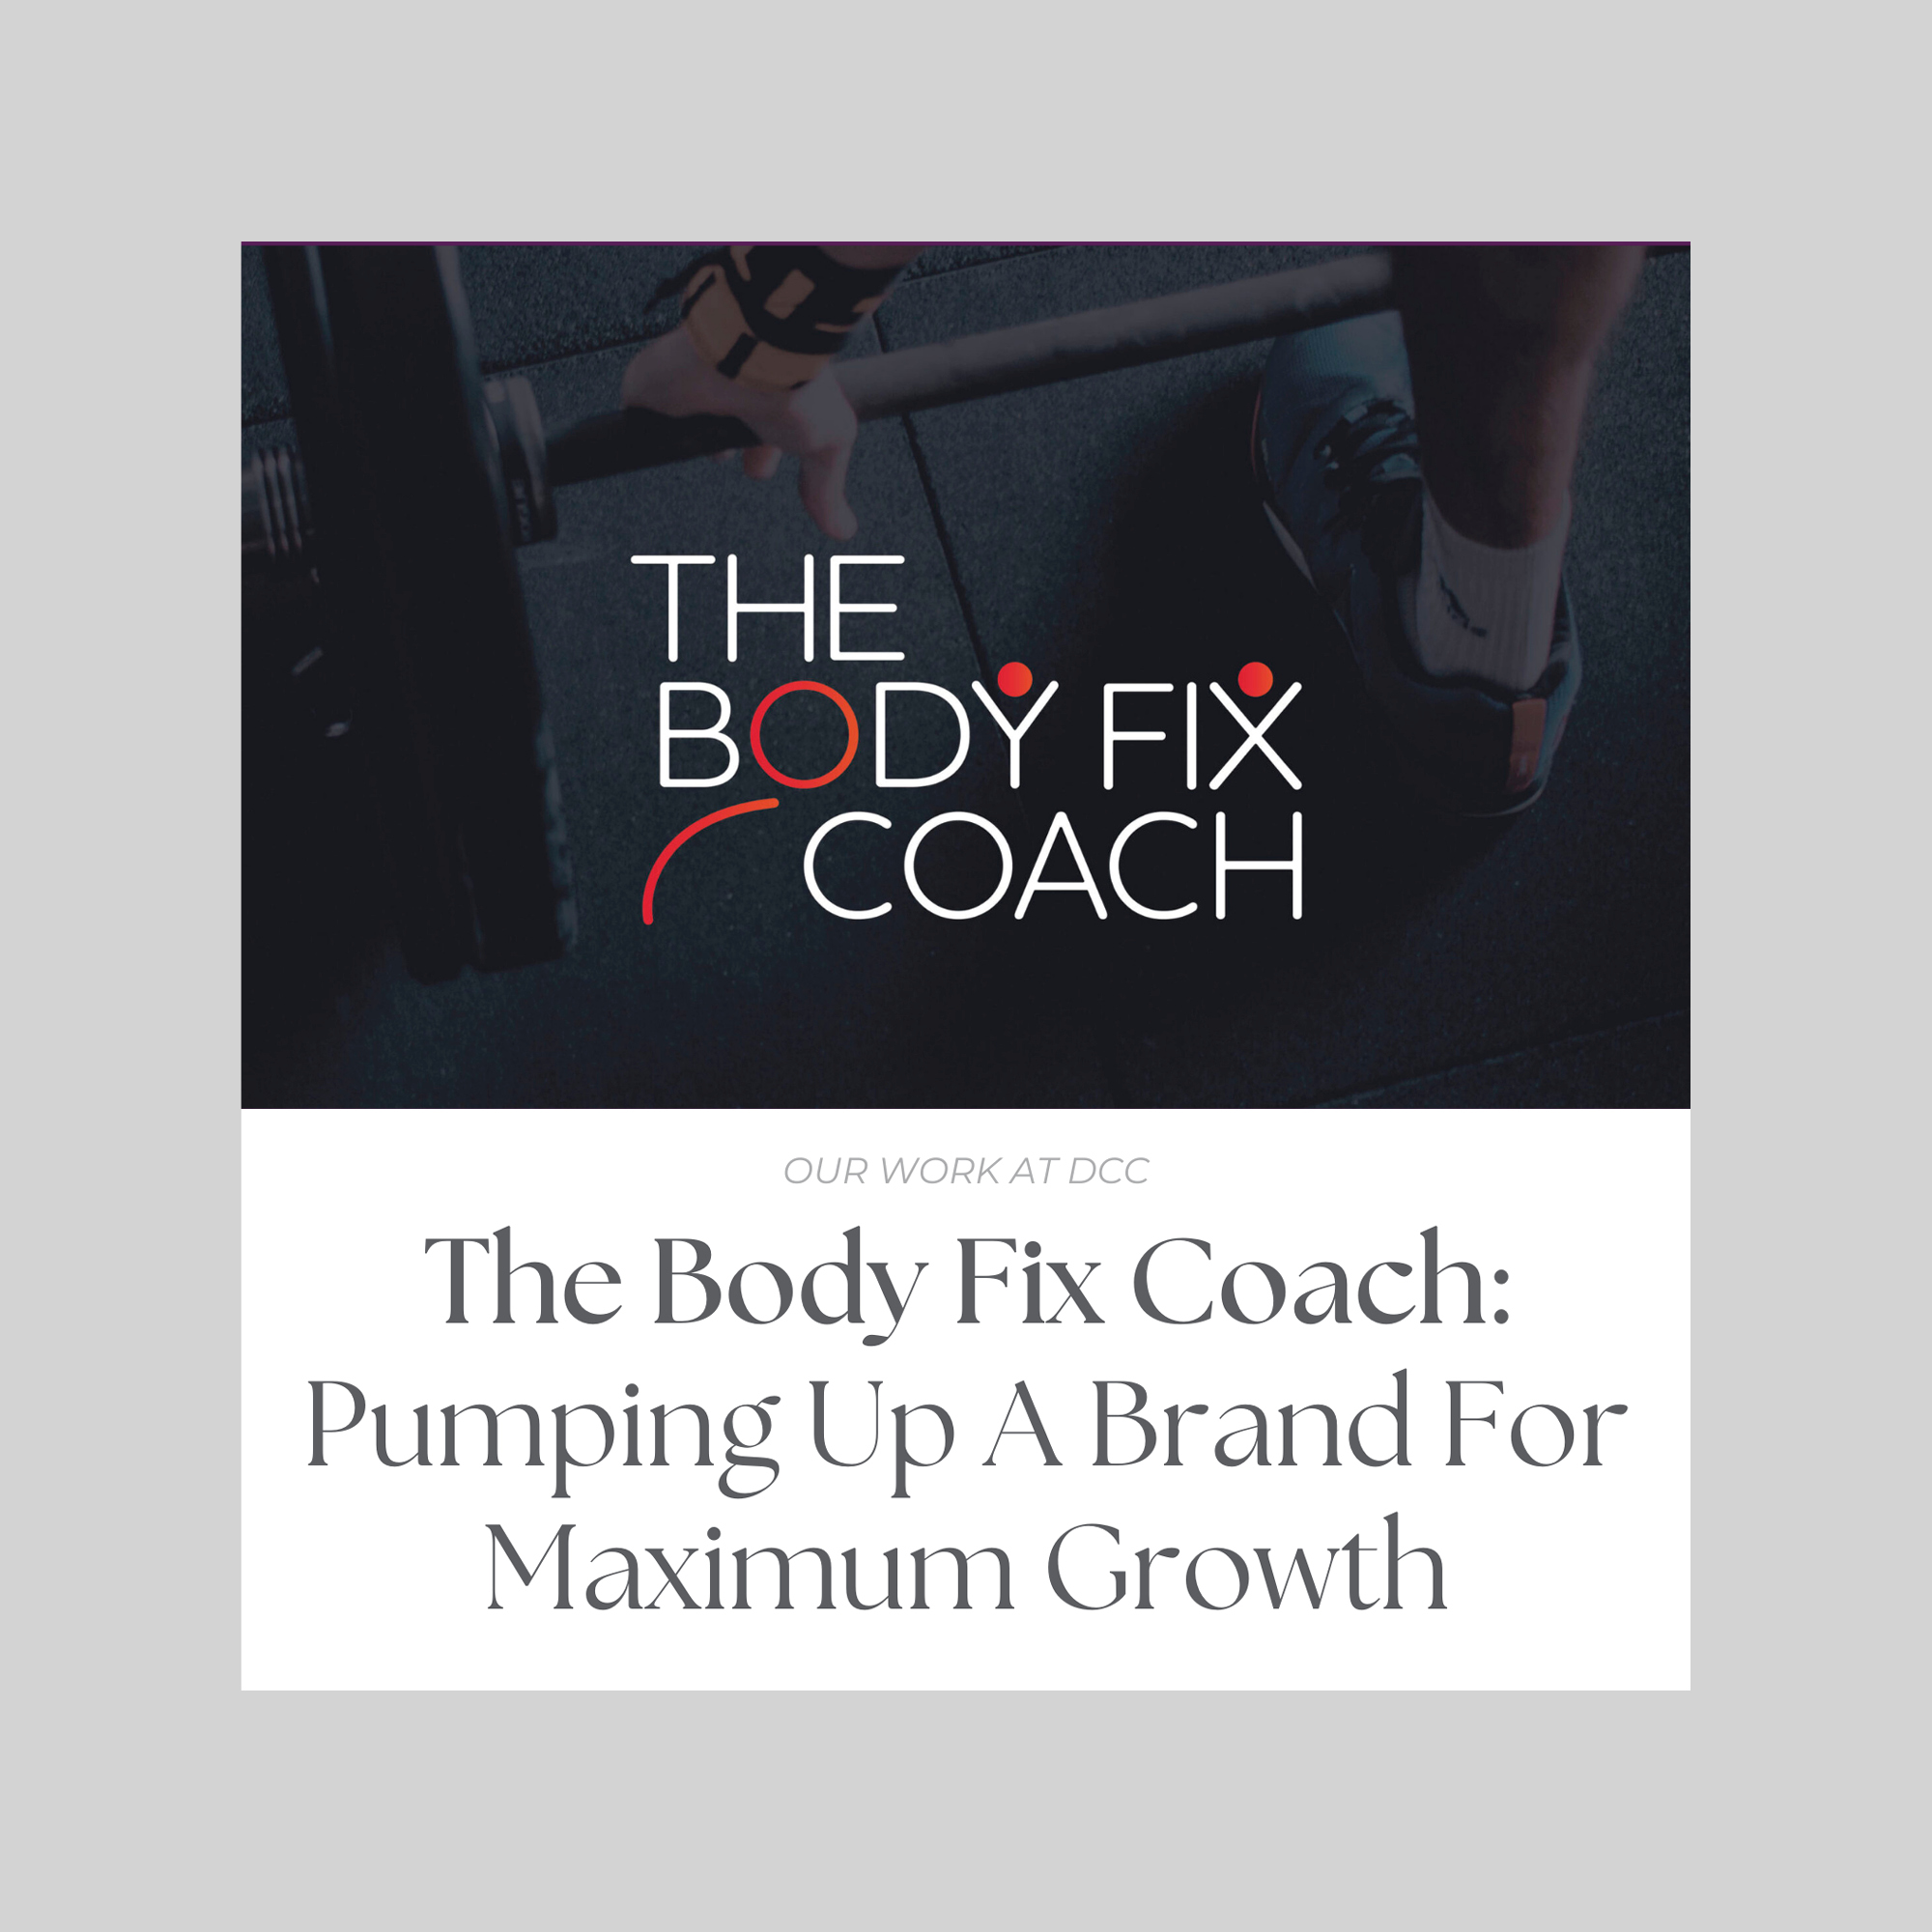 How Rebranding Skyrocketed The Body Fix Coach’s Revenue